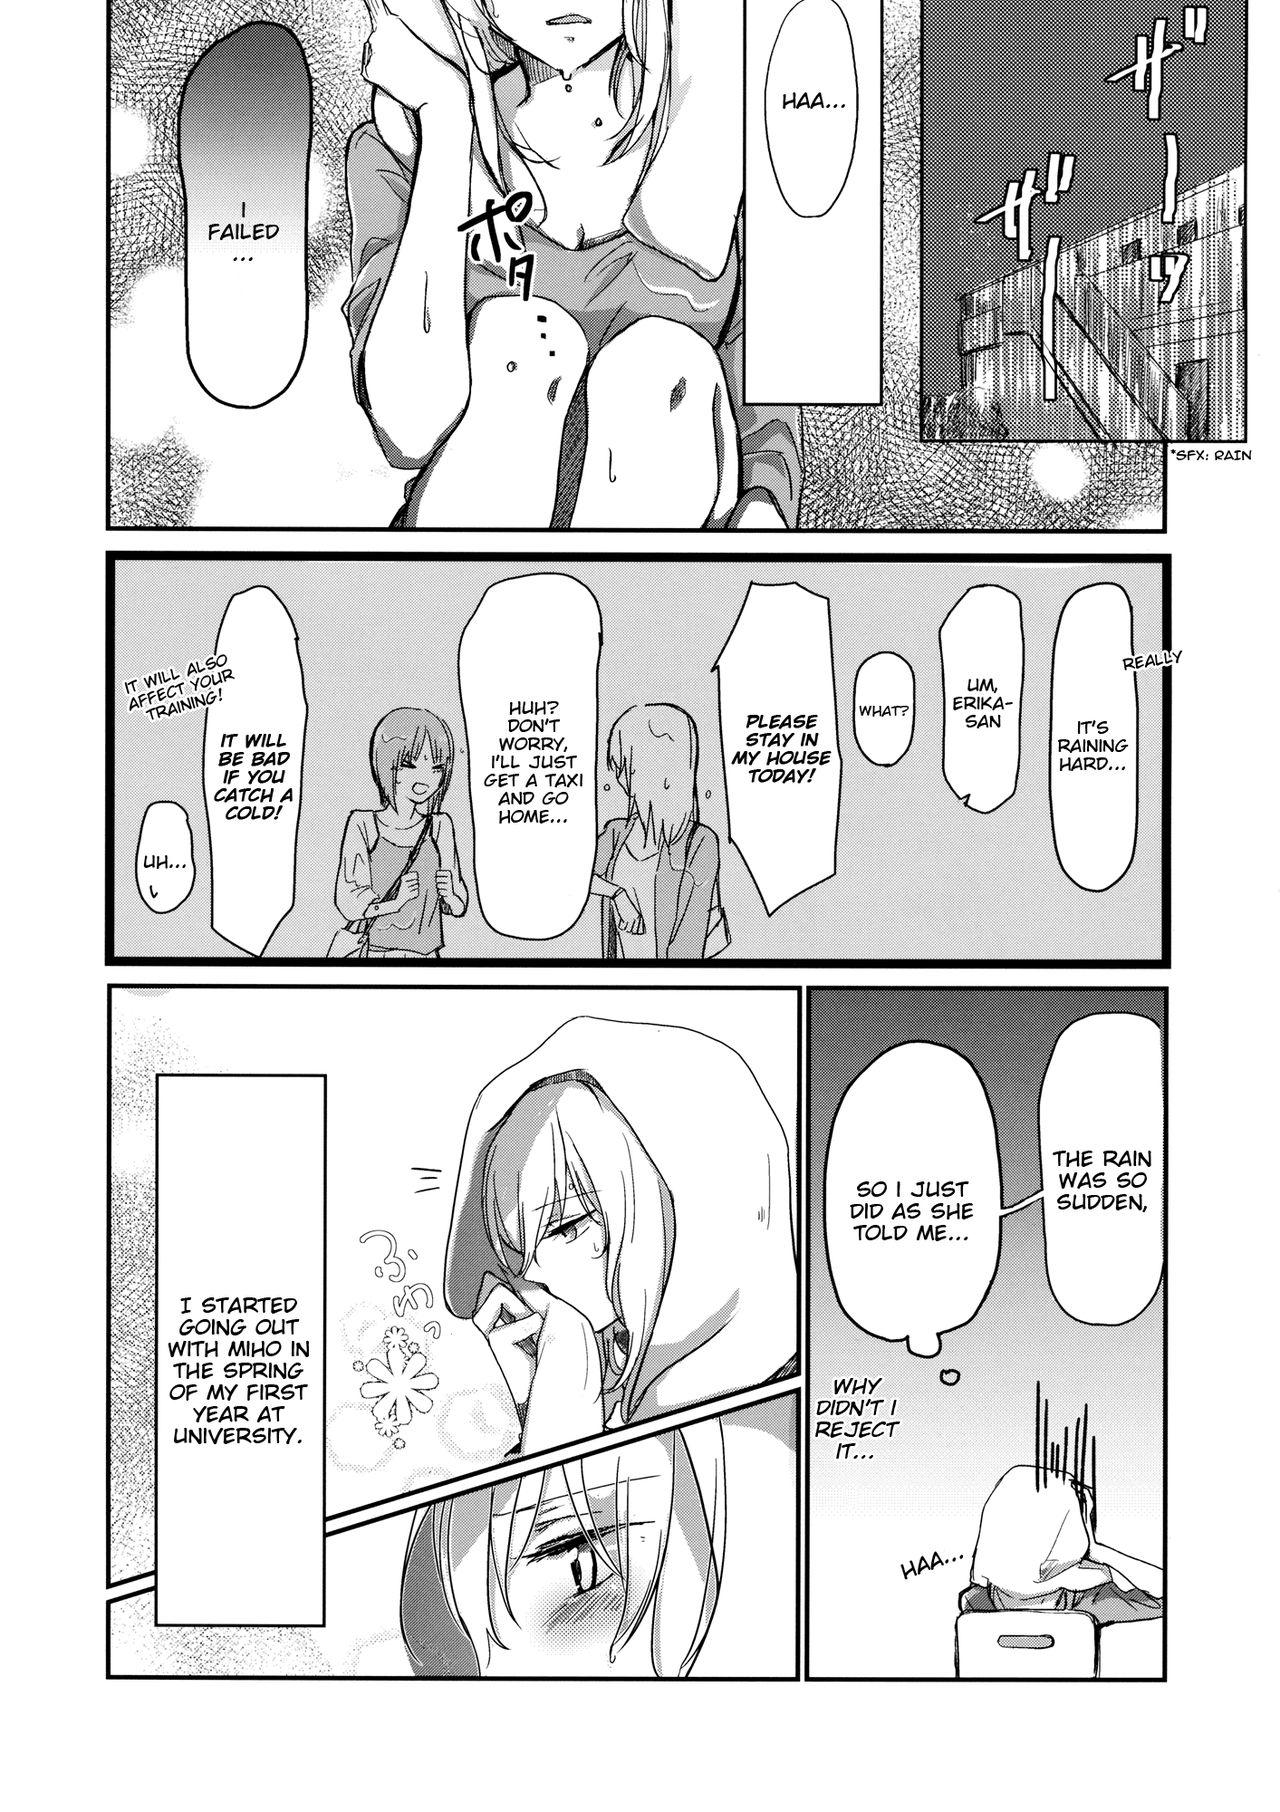 Leaked for the first time - Girls und panzer Pareja - Page 3